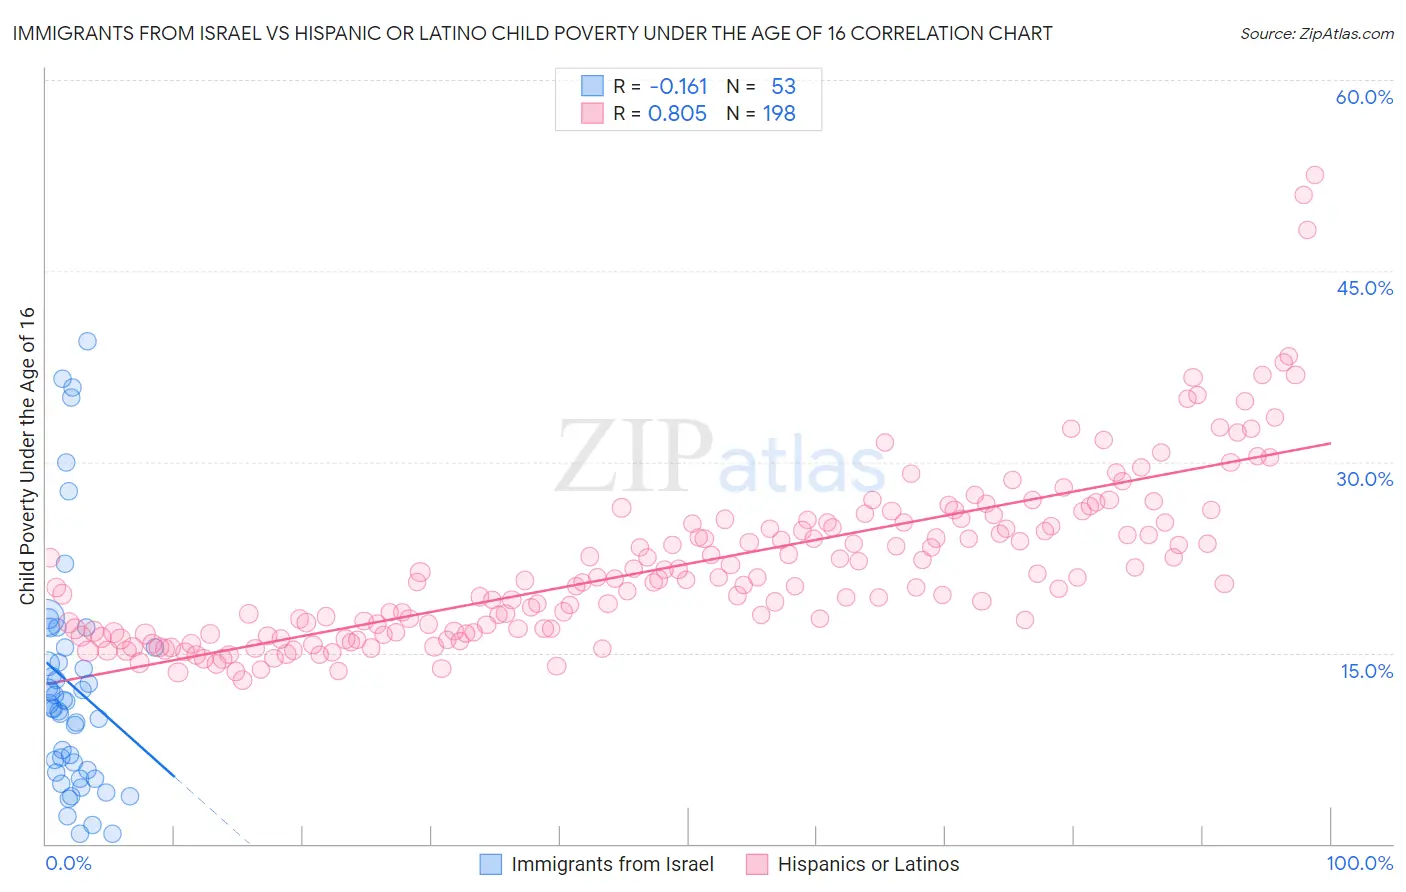 Immigrants from Israel vs Hispanic or Latino Child Poverty Under the Age of 16